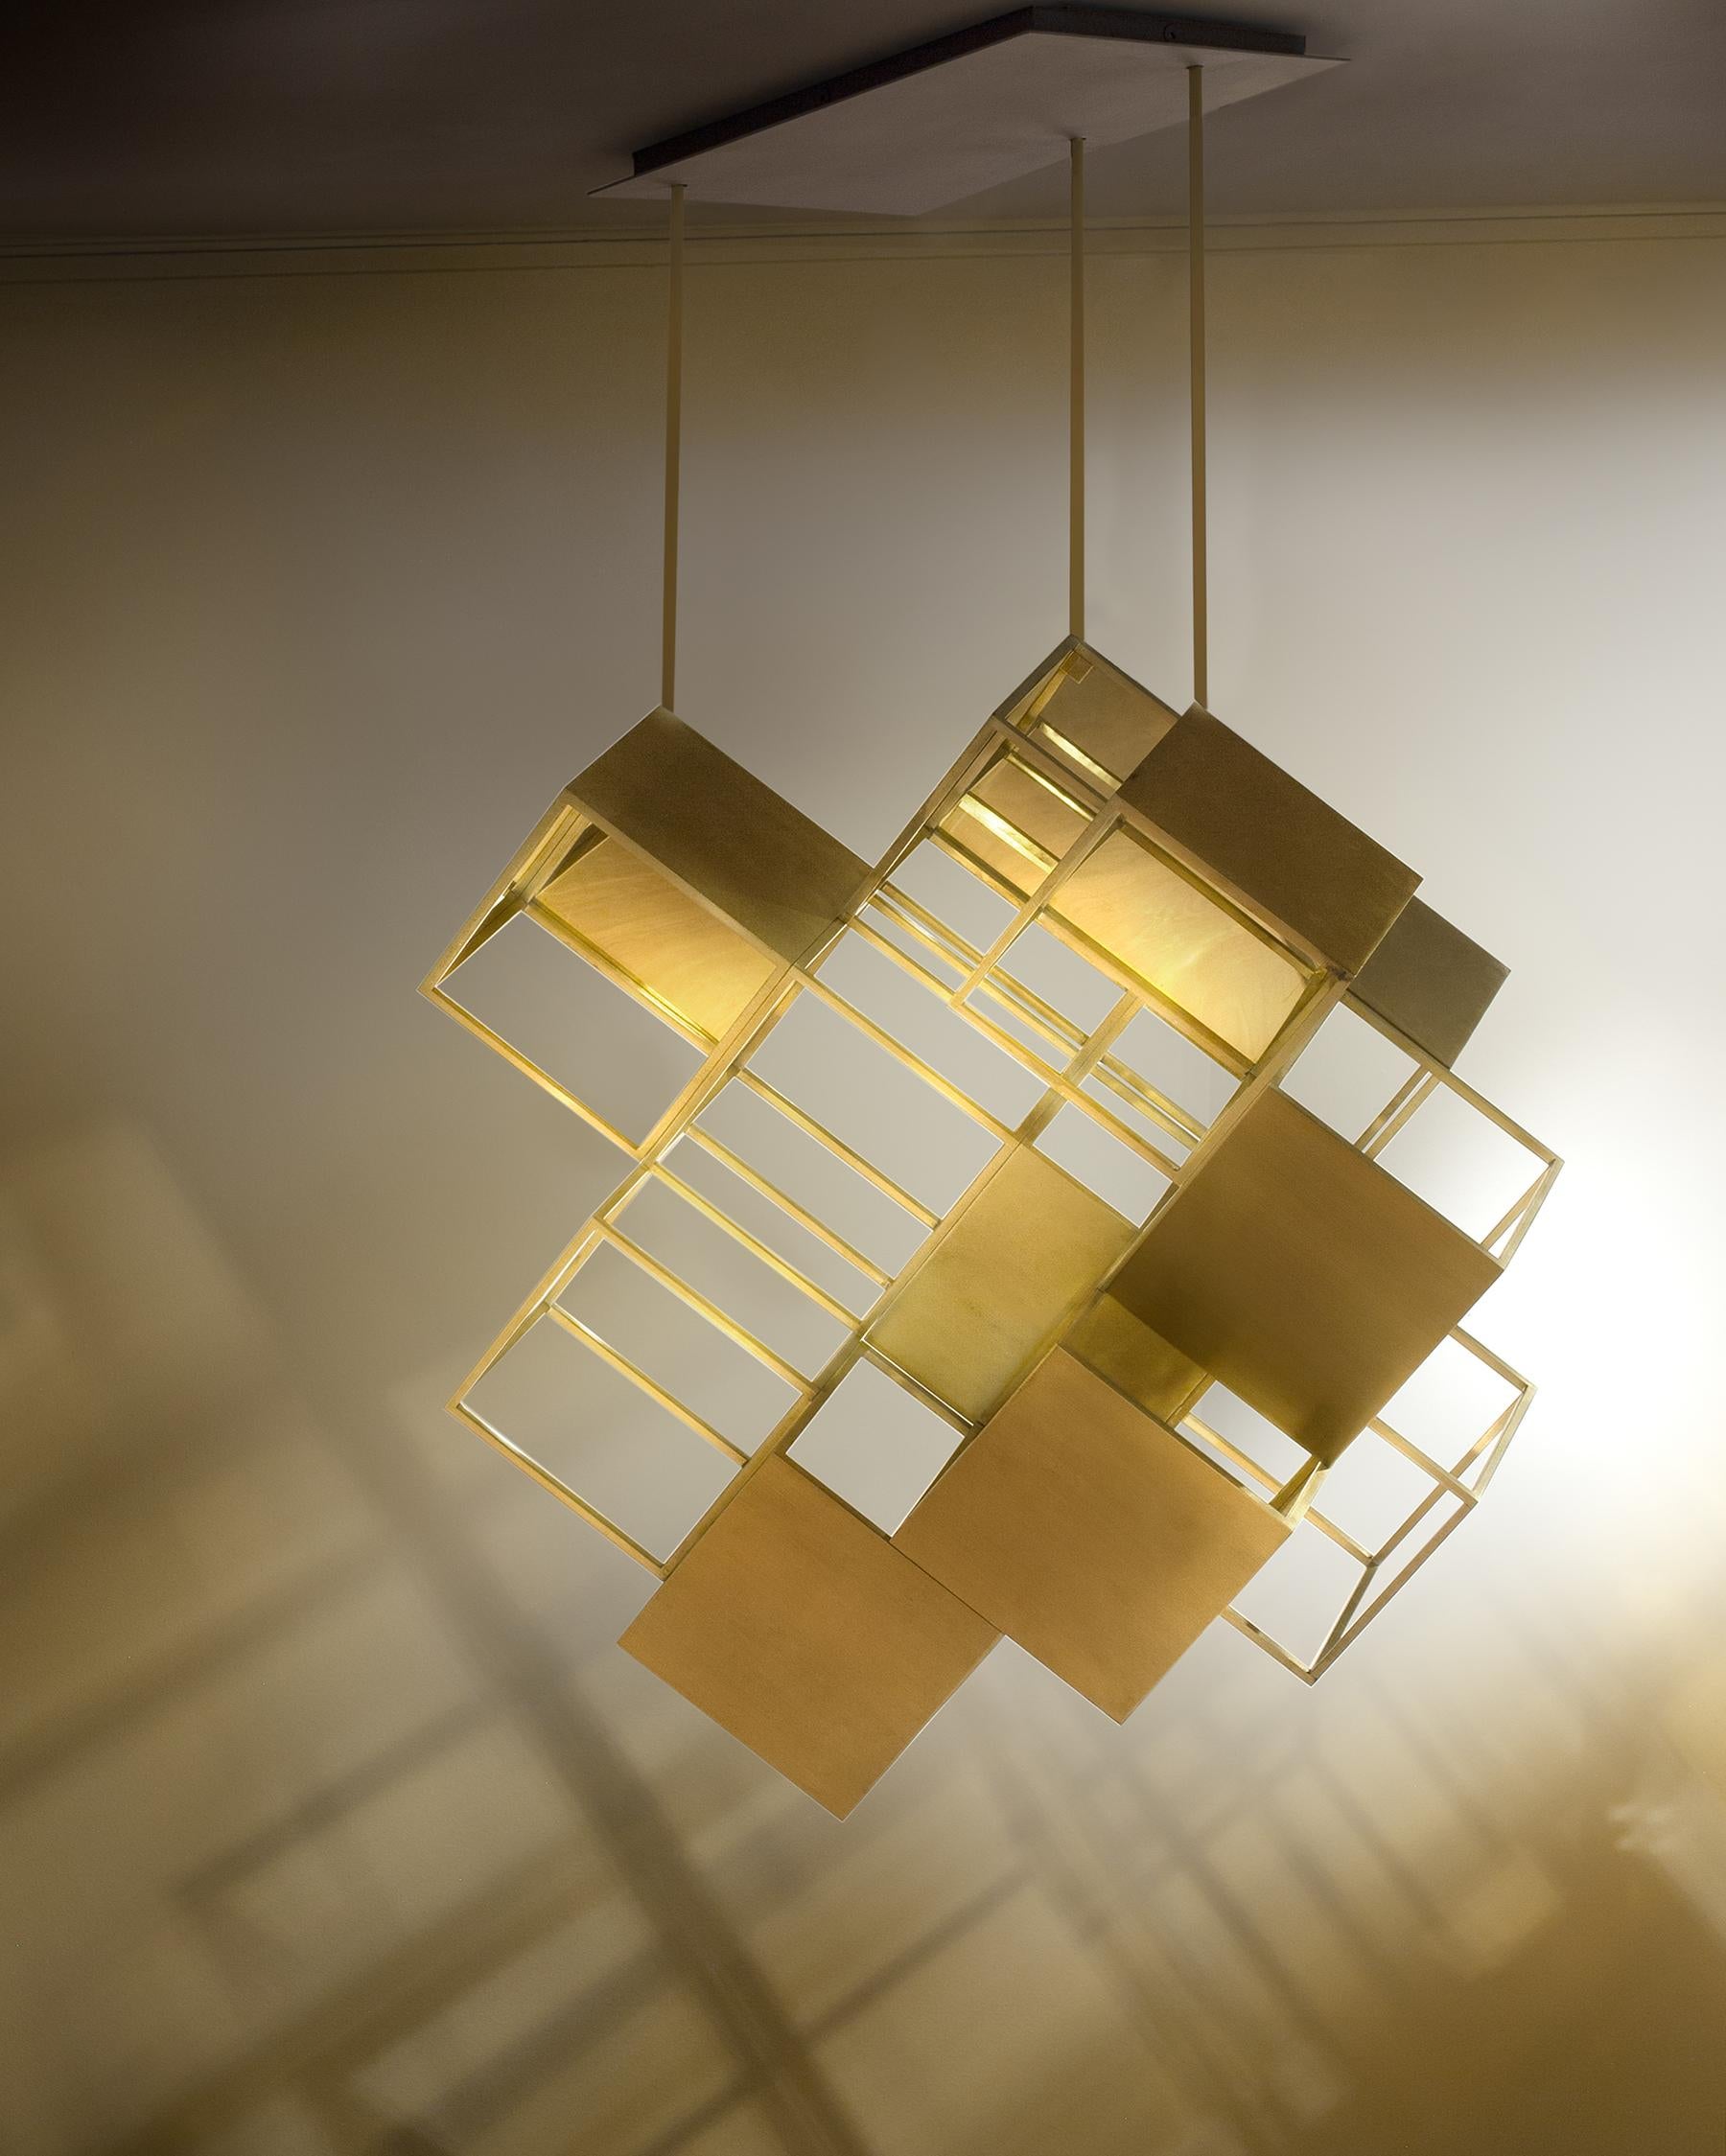 Brushed Lattis 11 Chandelier Lighting Brass by Diaphan Studio, REP by Tuleste Factory